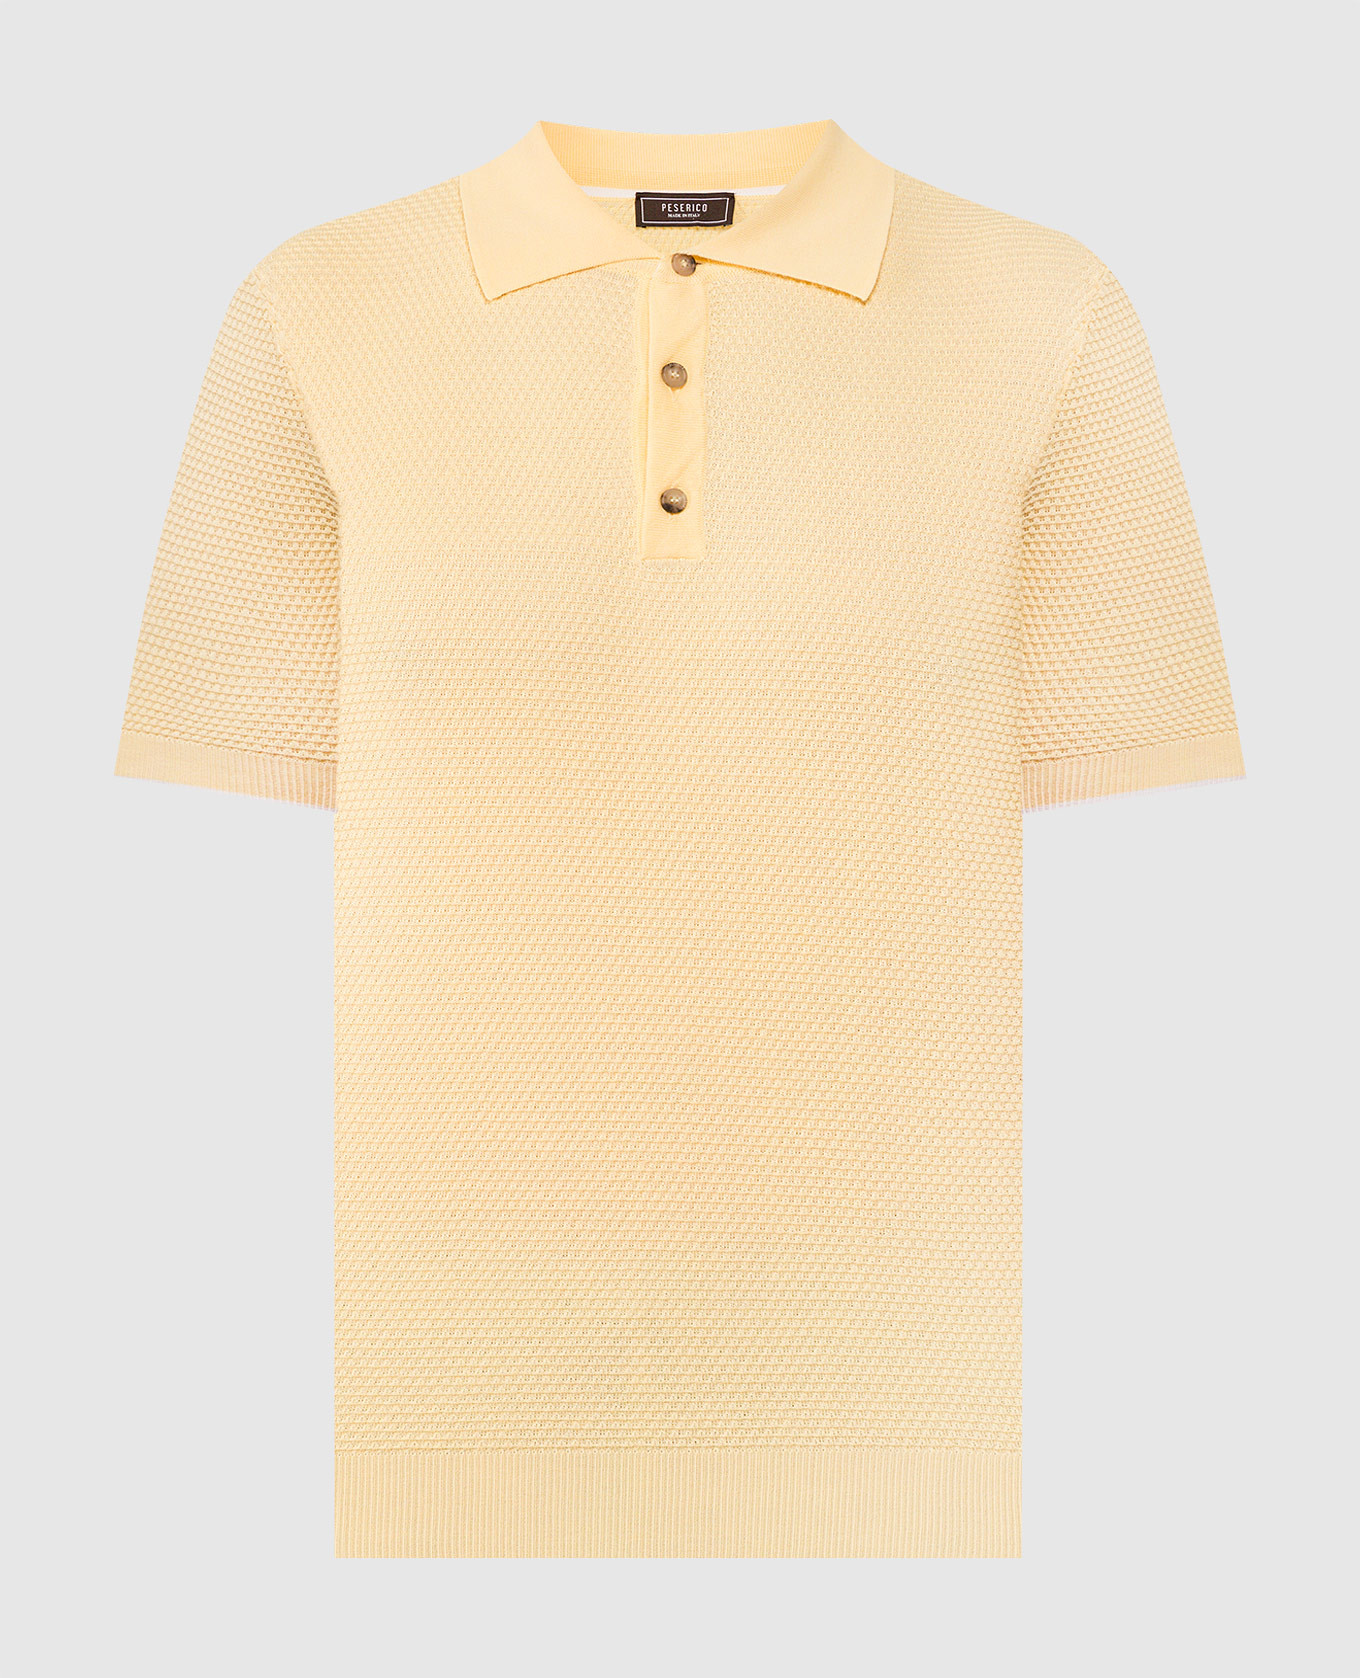 Yellow polo in a textured pattern